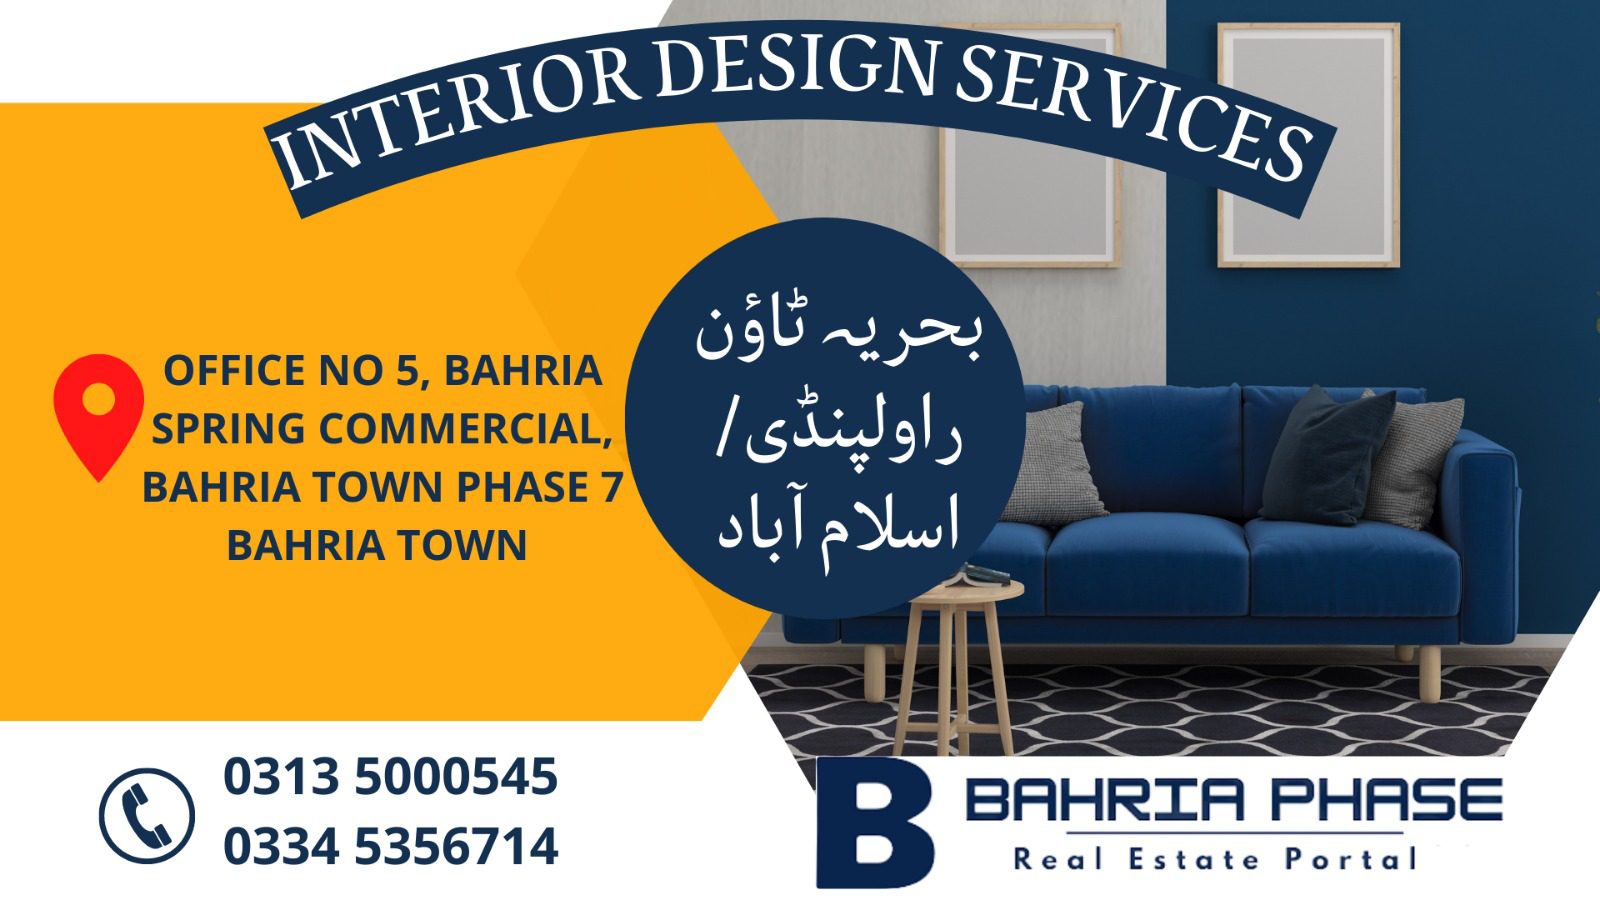 Interior Design Services in Bahria Town Rawalpindi, Office No 5, Bahria Spring Commercial, Bahria Town,Punjab,Pakistan